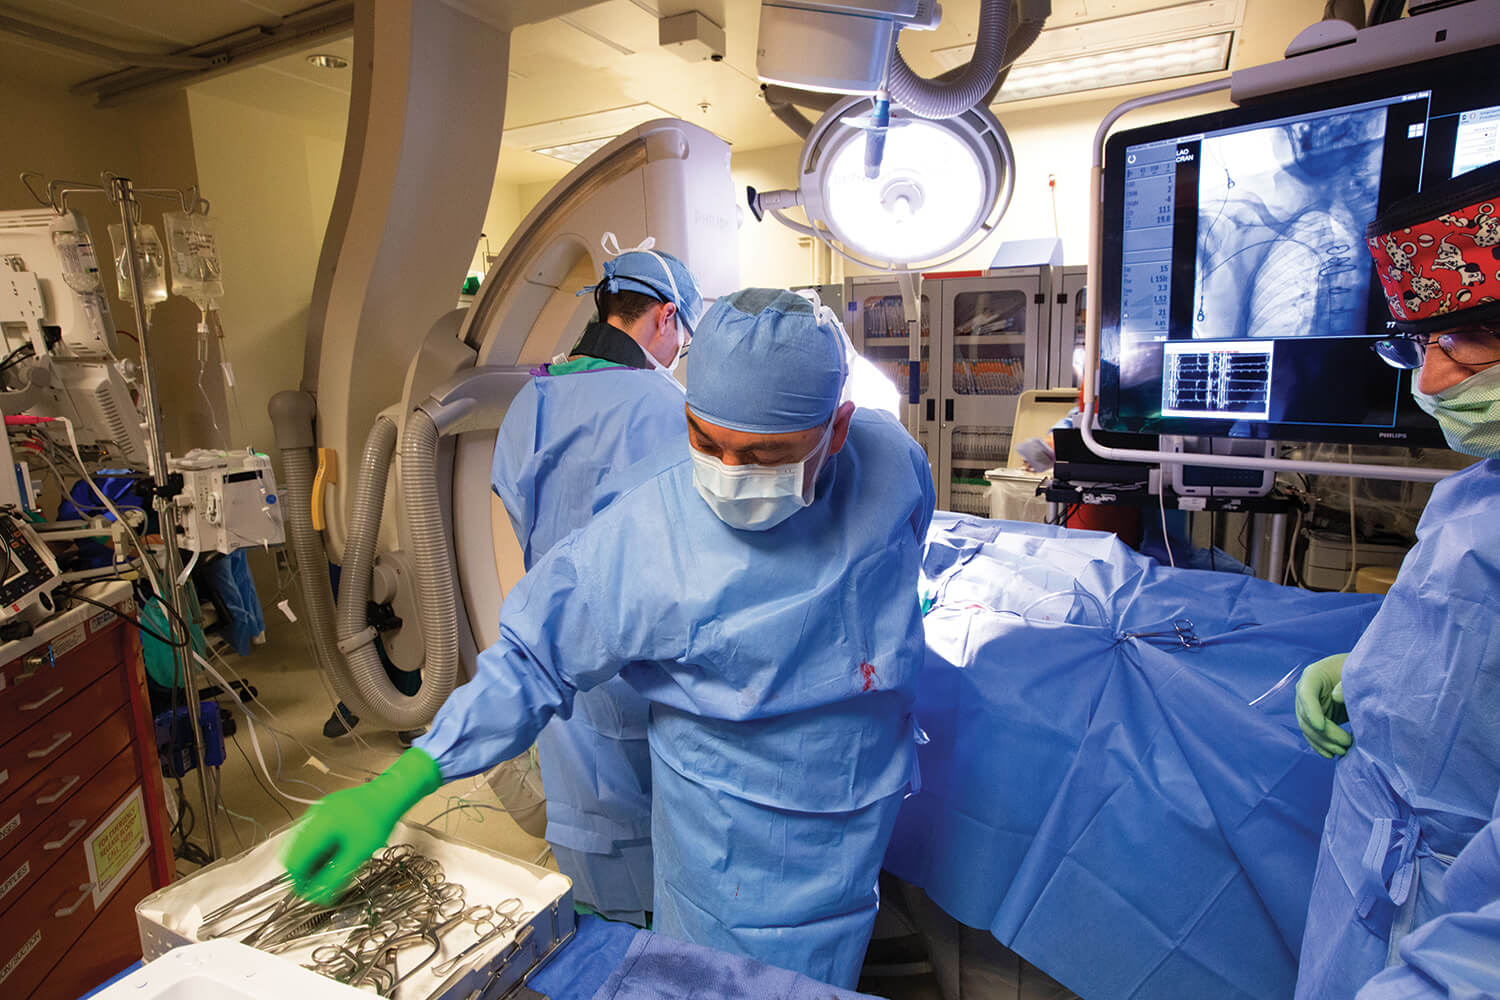 Cardiologist Hamid Afshar, M.D., center, implants the remedē system in a patient at the Michael E. DeBakey VA Medical Center.